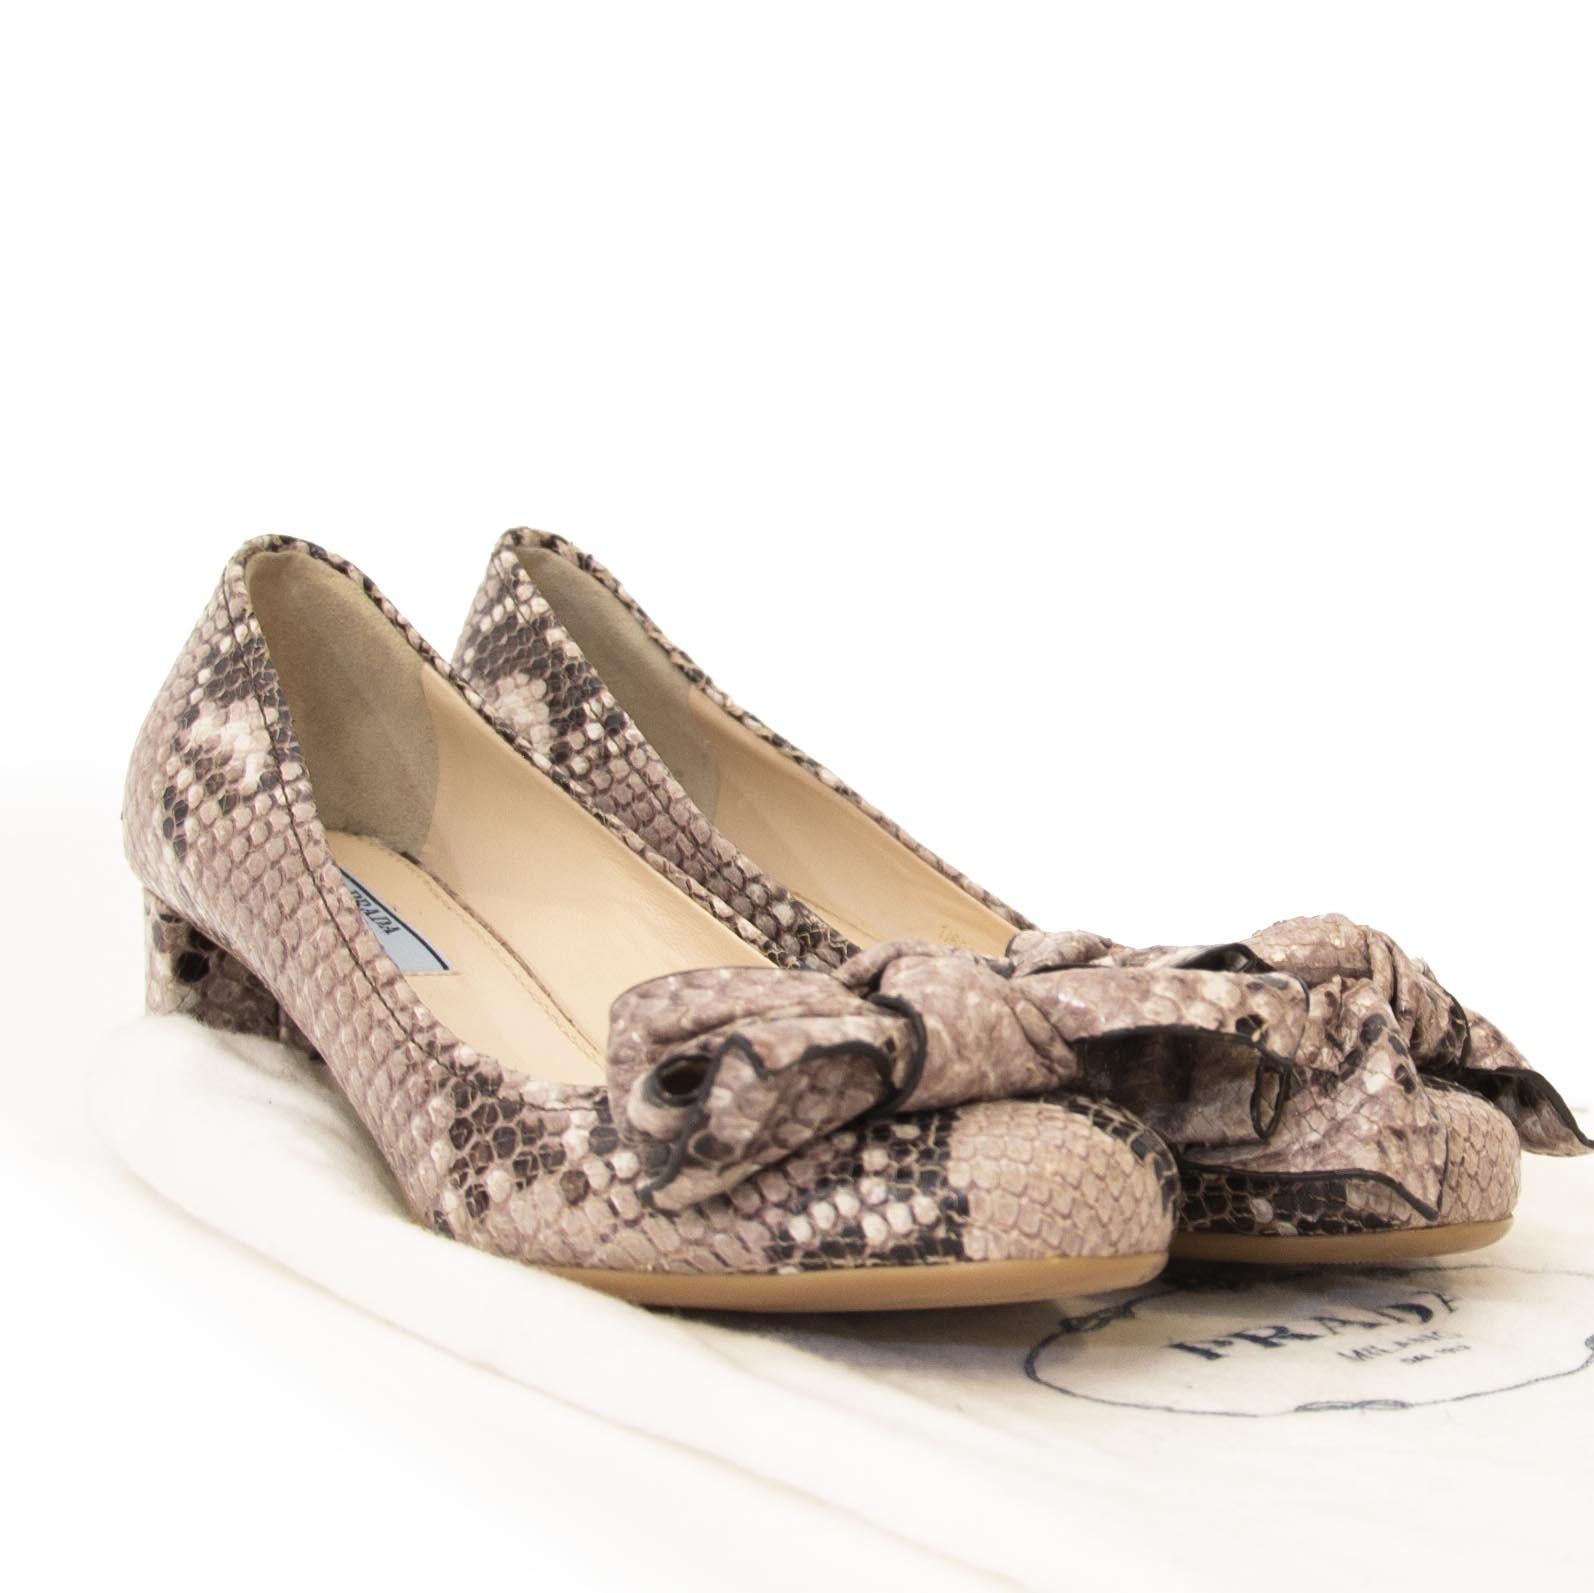 Brand new!

Prada Python Bow Heels - Size 36



Animal prints will be forever chic!
These Prada heels features python leather and a bow with 'Prada' on it. 
If you are looking for comfortable heels then are these one the perfect pair! 

Comes